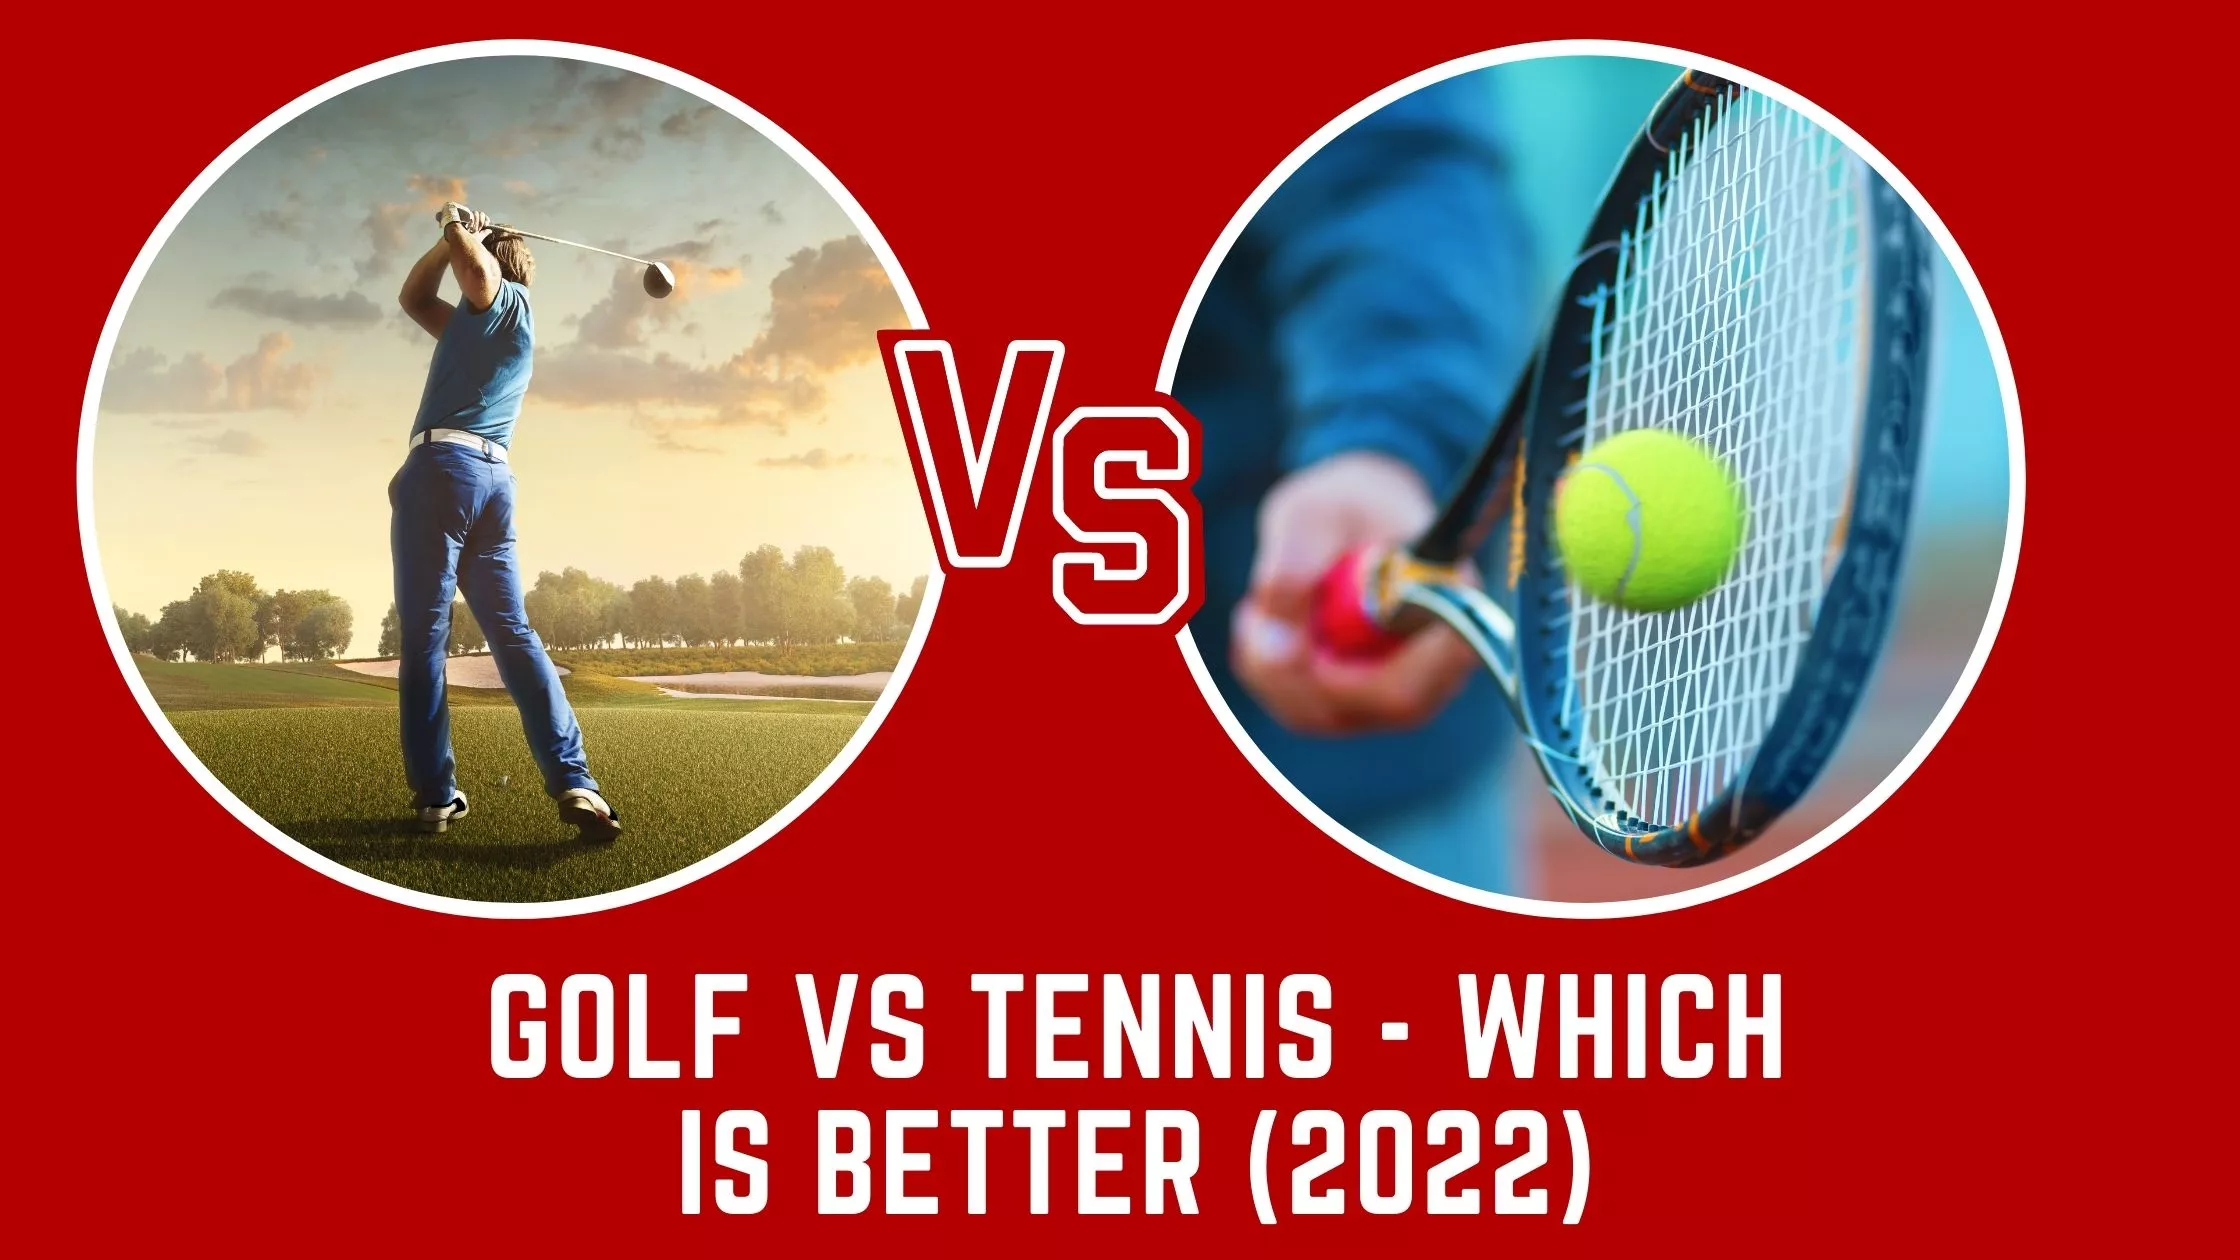 Golf Vs Tennis - Which Is Better (2022)